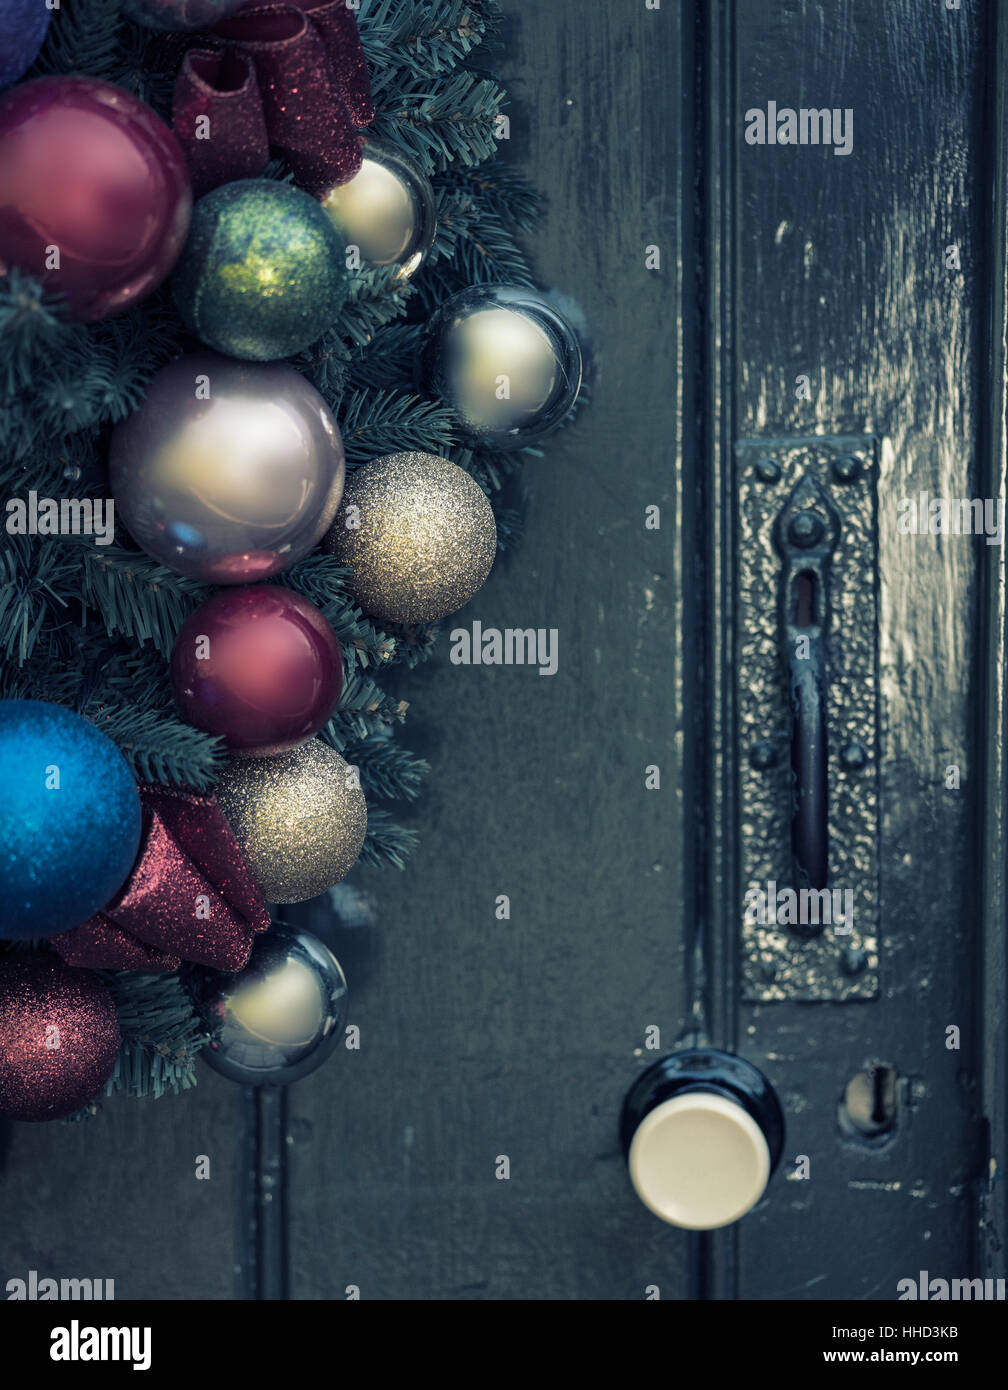 Beautiful close up of old fashioned retro vintage style Christmas wreath hanging on wooden door Stock Photo